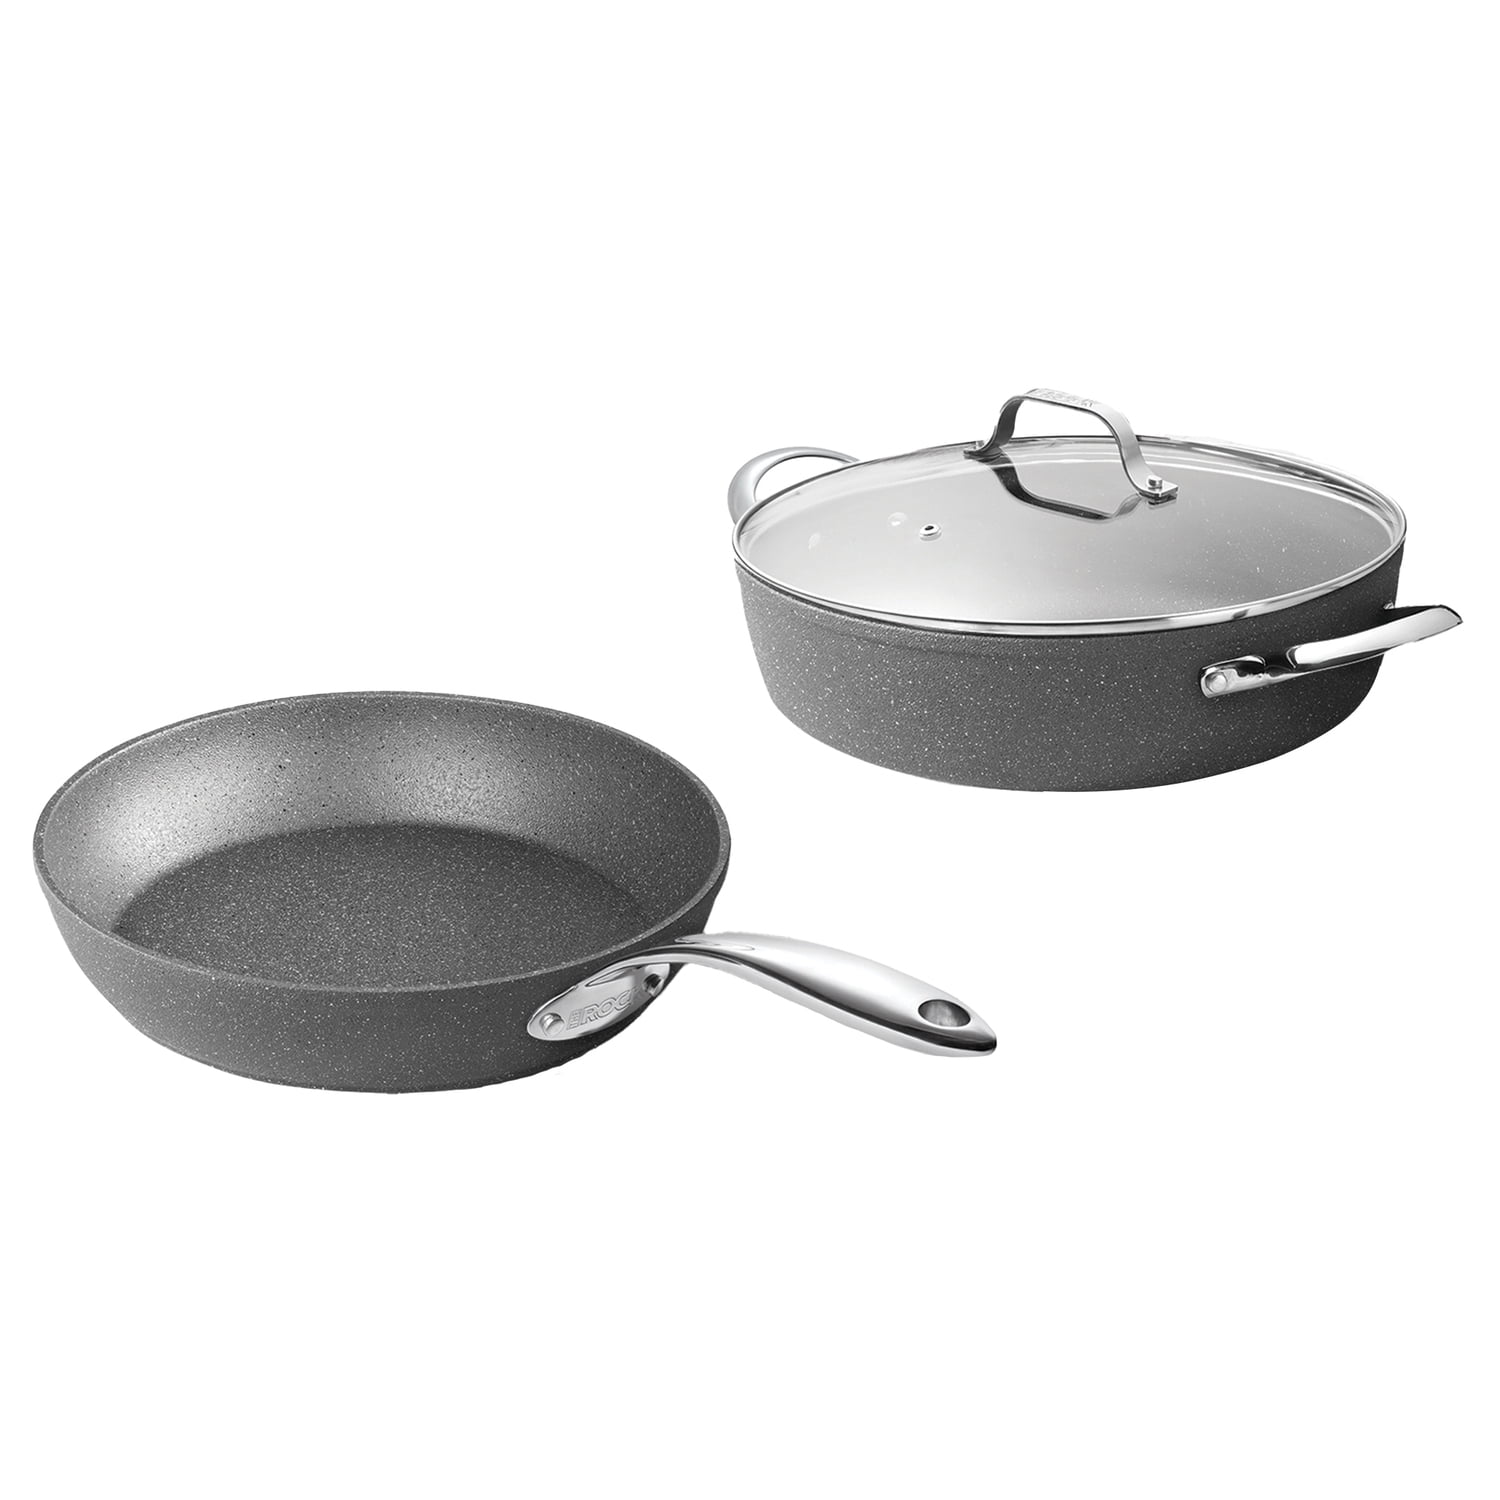 THE ROCK by Starfrit 060711-001-0000 3-Piece Cookware Set